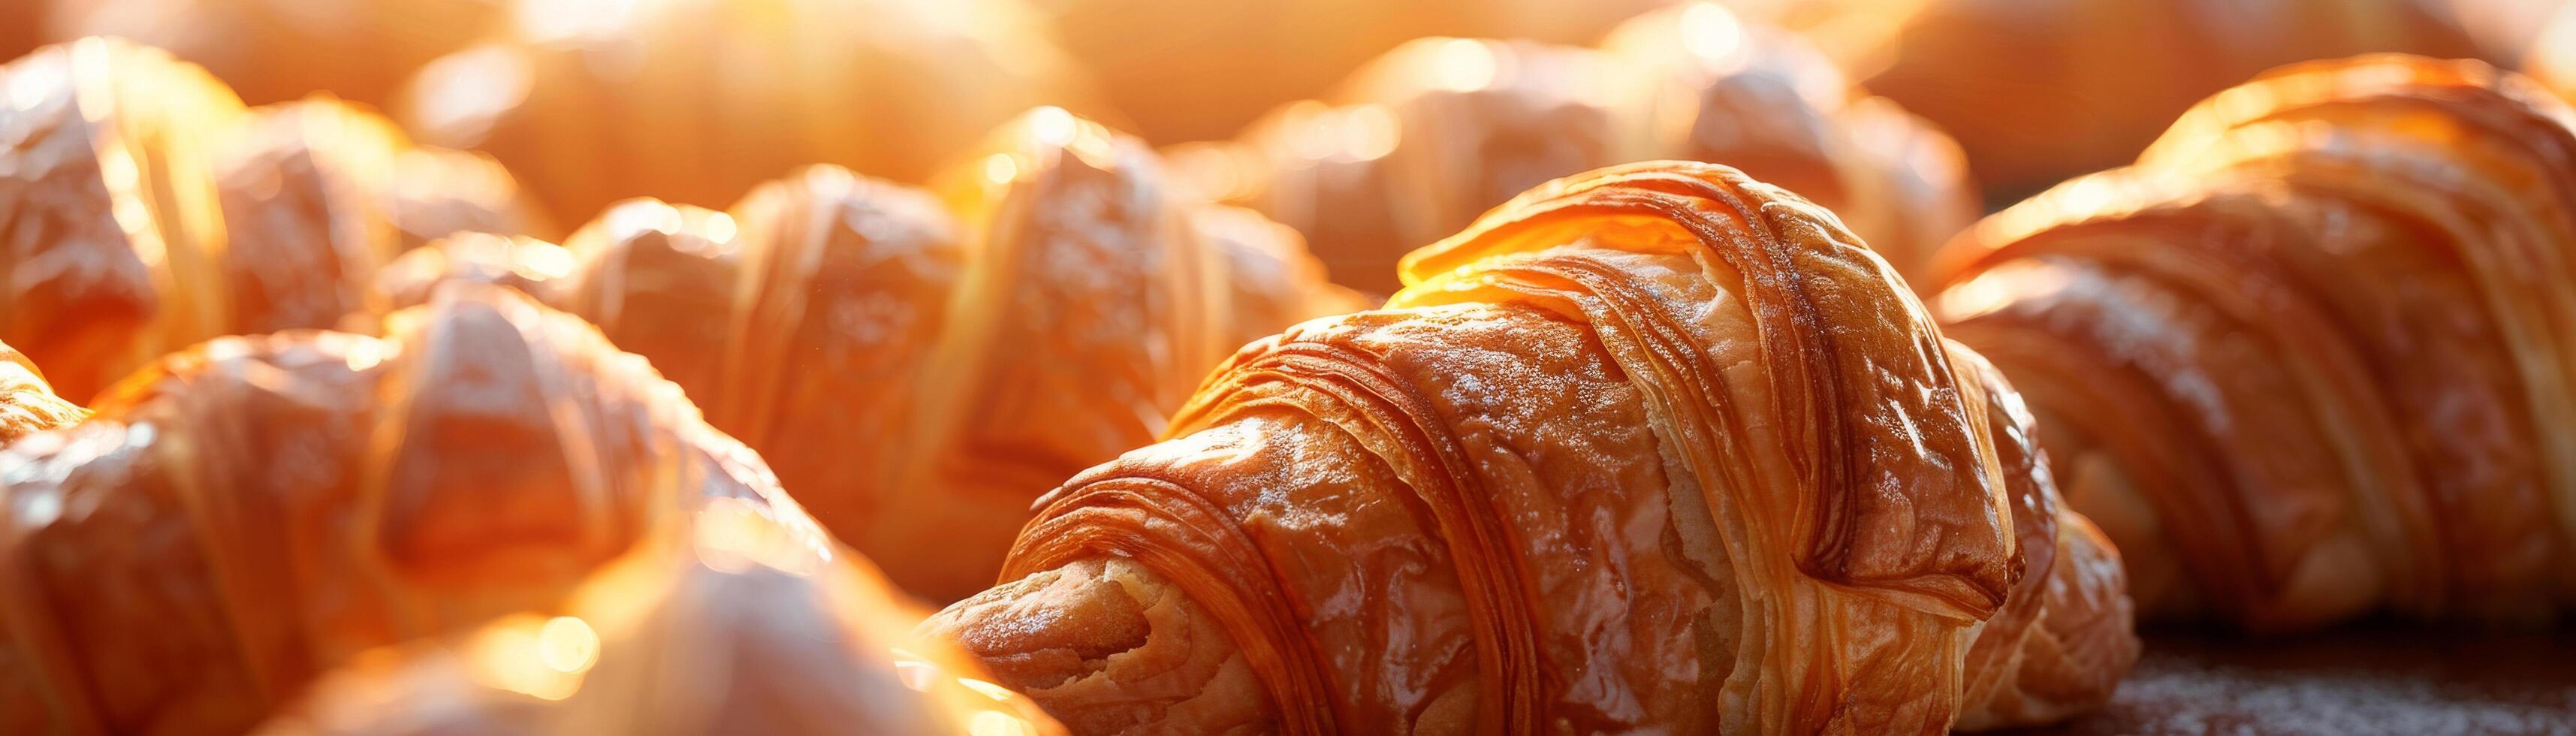 A series of croissants bask in the glow of the sunrise, their crisp, golden layers illuminated and inviting photo